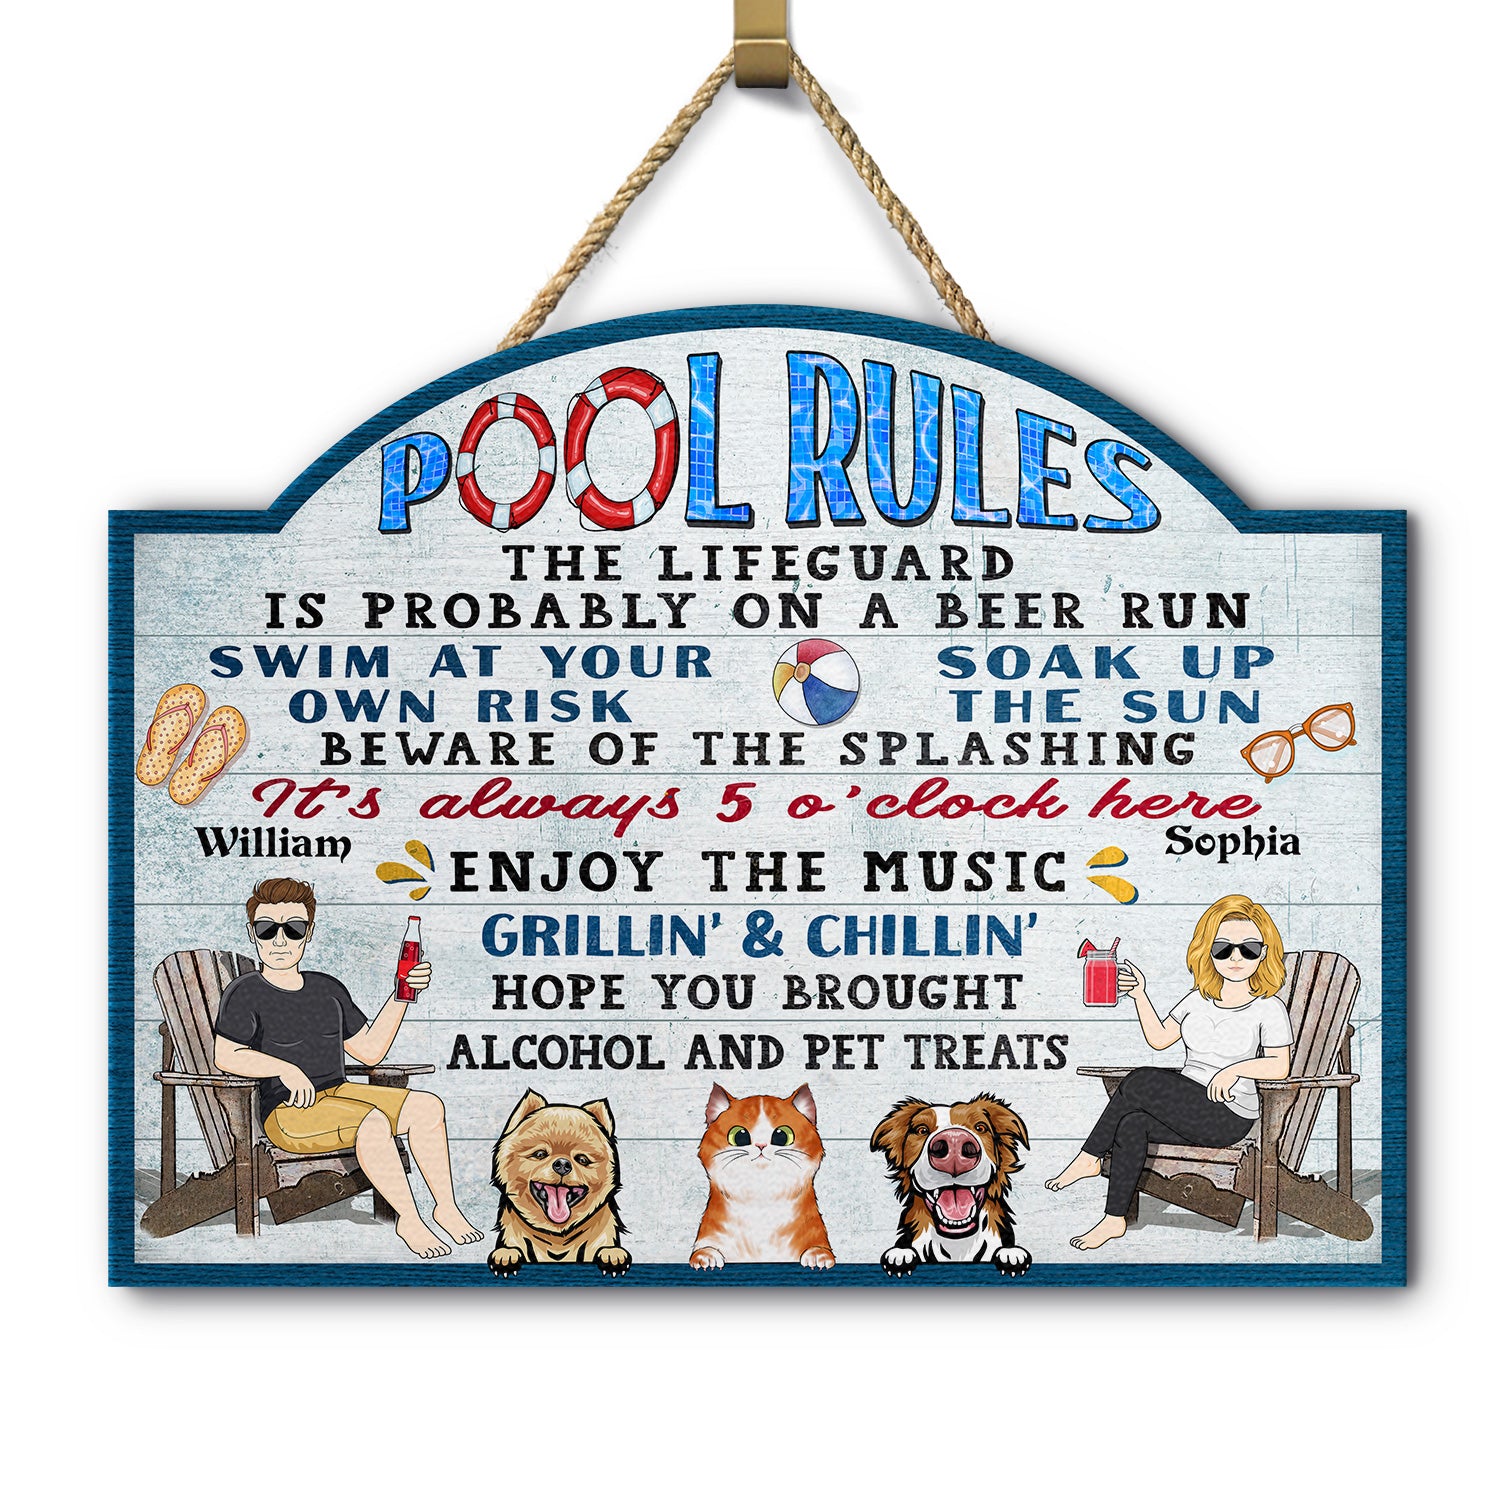 Pool Rules Hope You Brought Alcohol And Pet Treats Grilling - Home Decor, Backyard Decor, Gift For Her, Him, Family, Couples, Dog Lovers, Cat Lovers - Personalized Custom Shaped Wood Sign